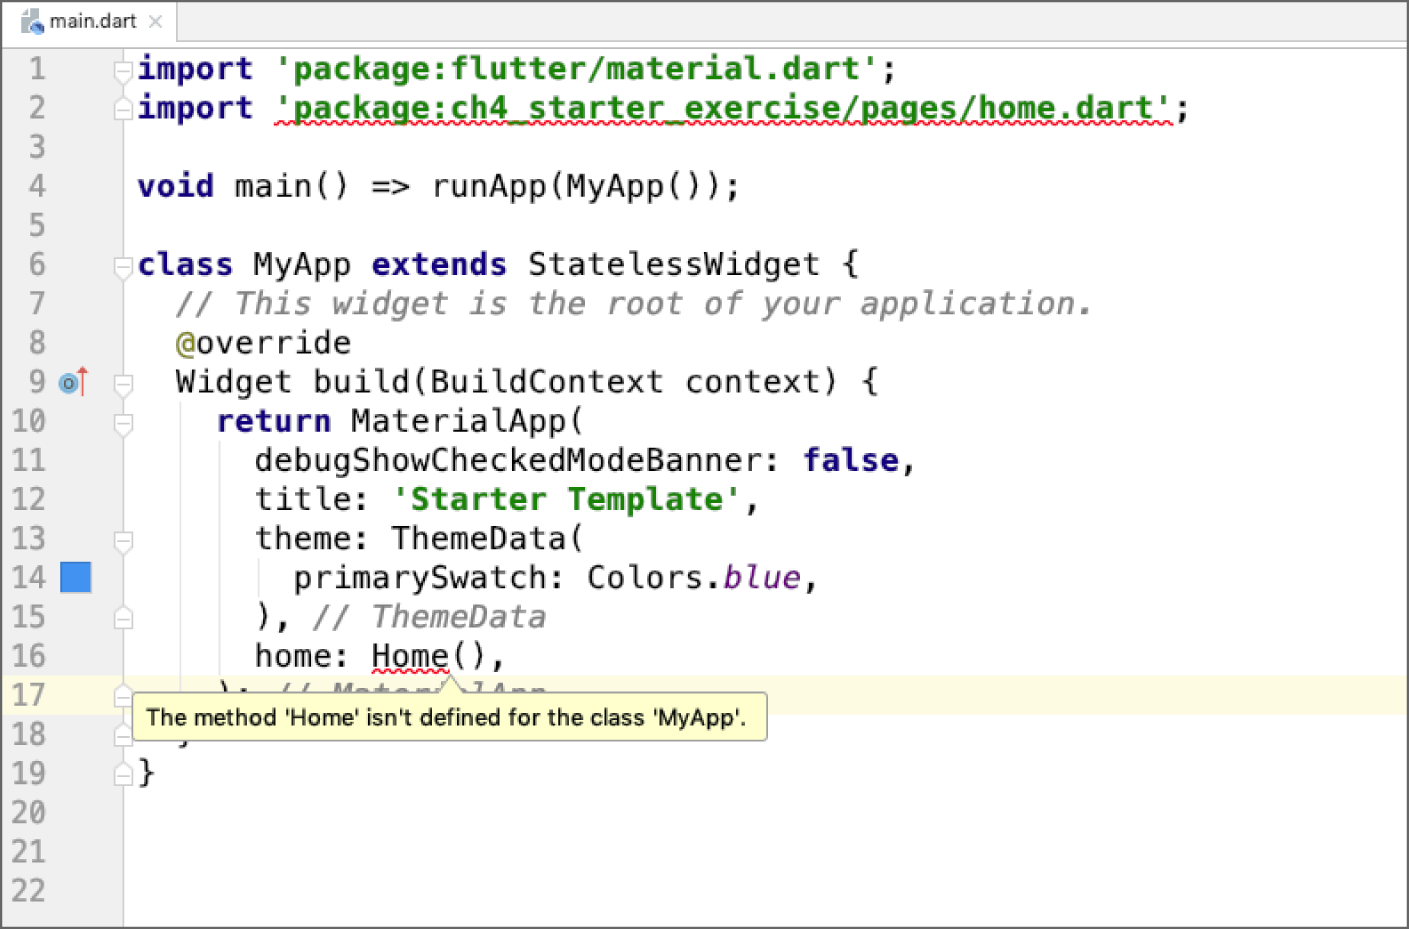 “Screenshot of Android Studio depicting a red squiggly line under the import statement pages/home.dart as well as the Home() method, which has this error: The method ““Home”” isn't defined for the class 'MyApp'. By hovering your mouse over pages/home.dart and Home(), you can read each error.”